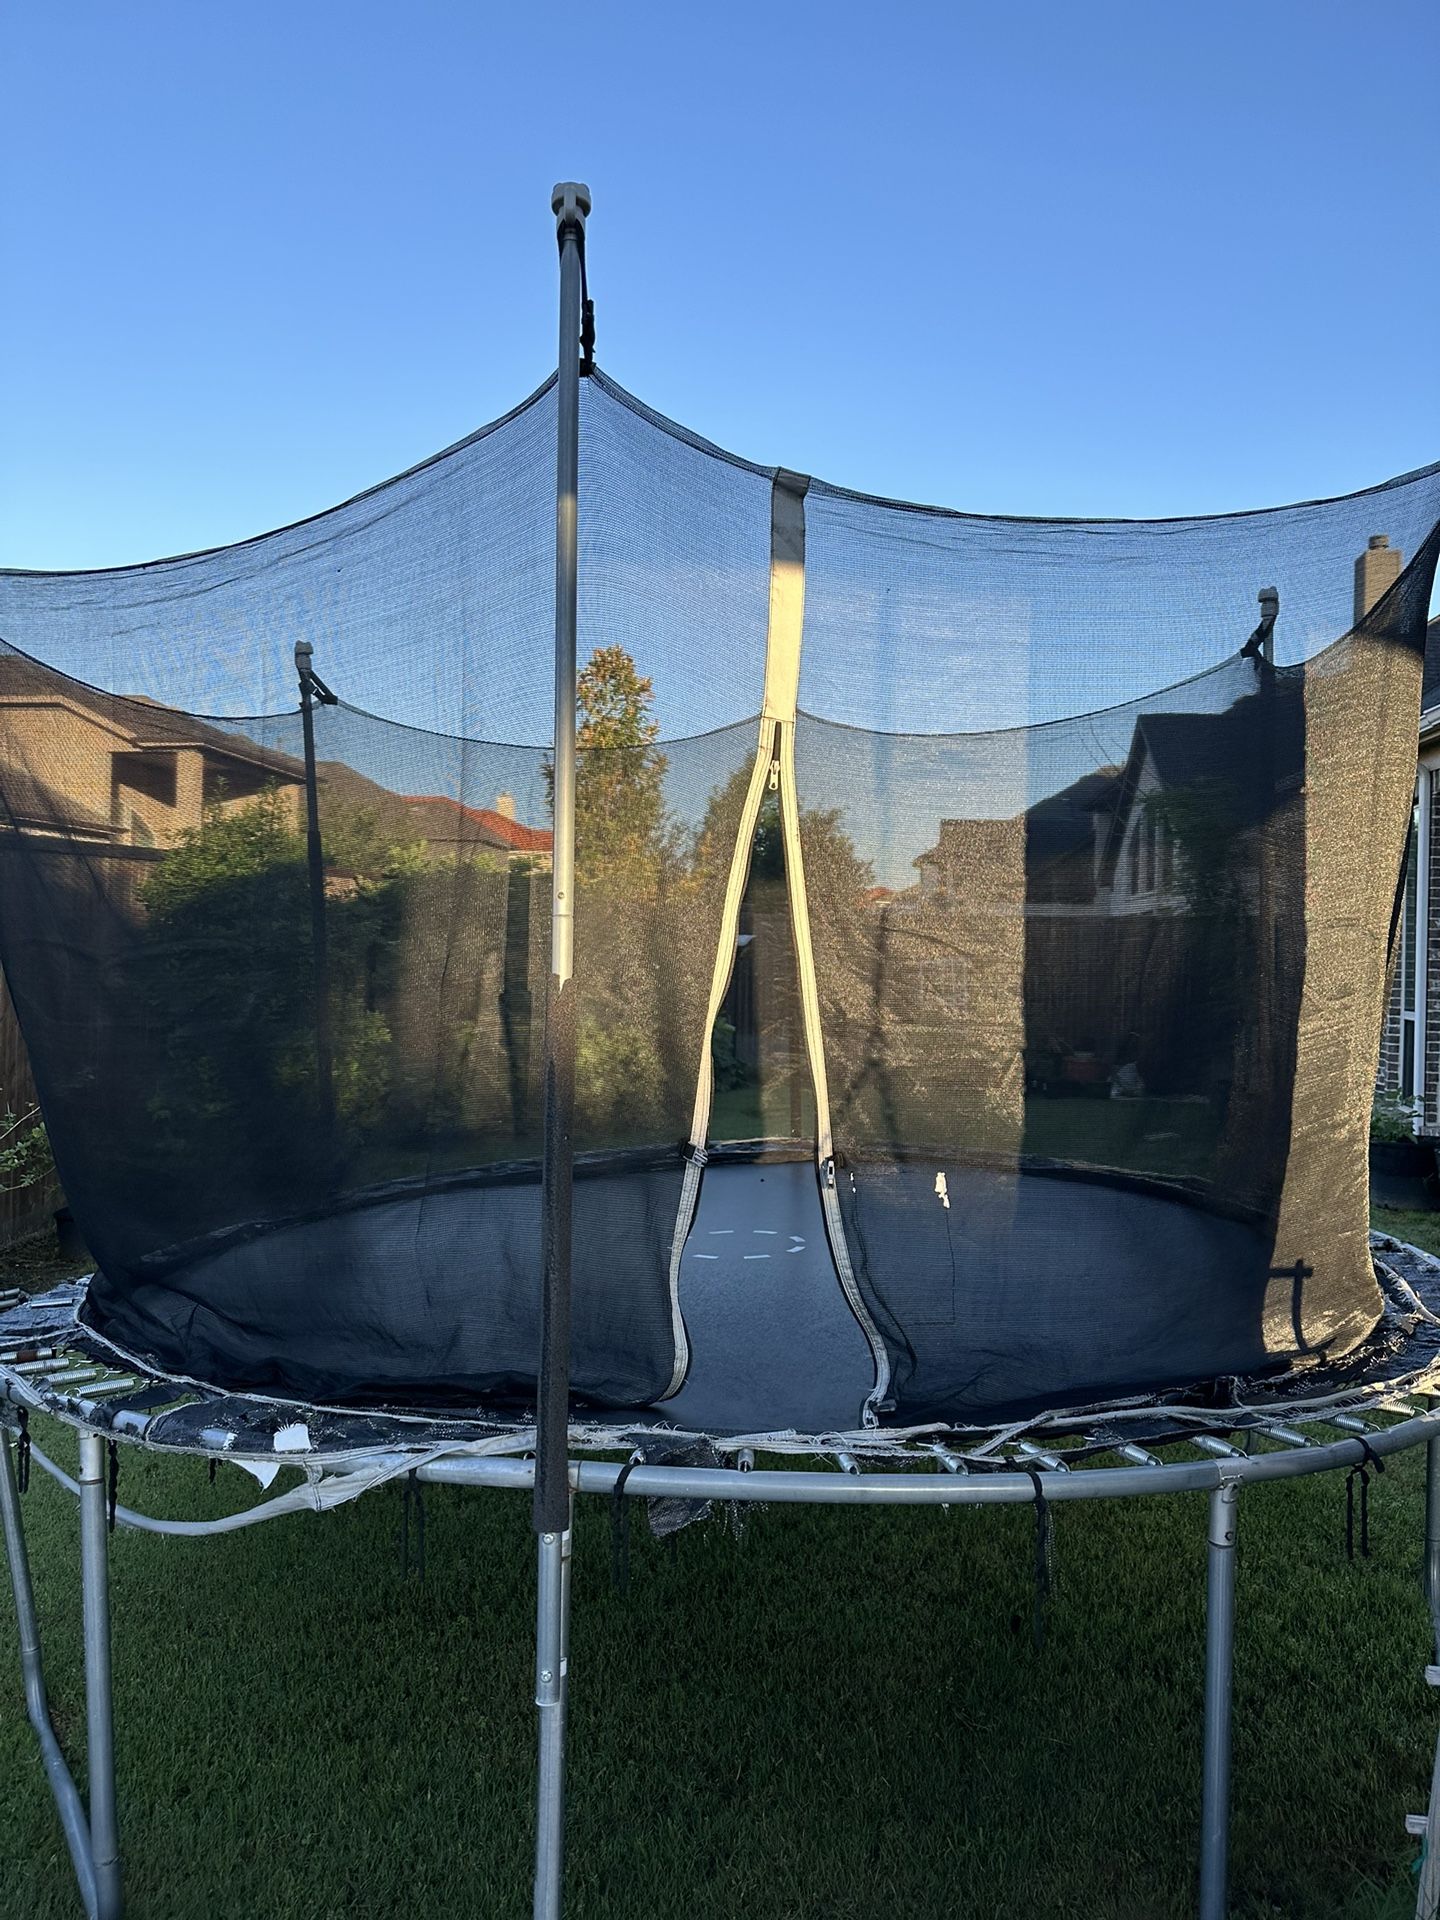 Used 12 Ft Trampoline Pick Up For Free